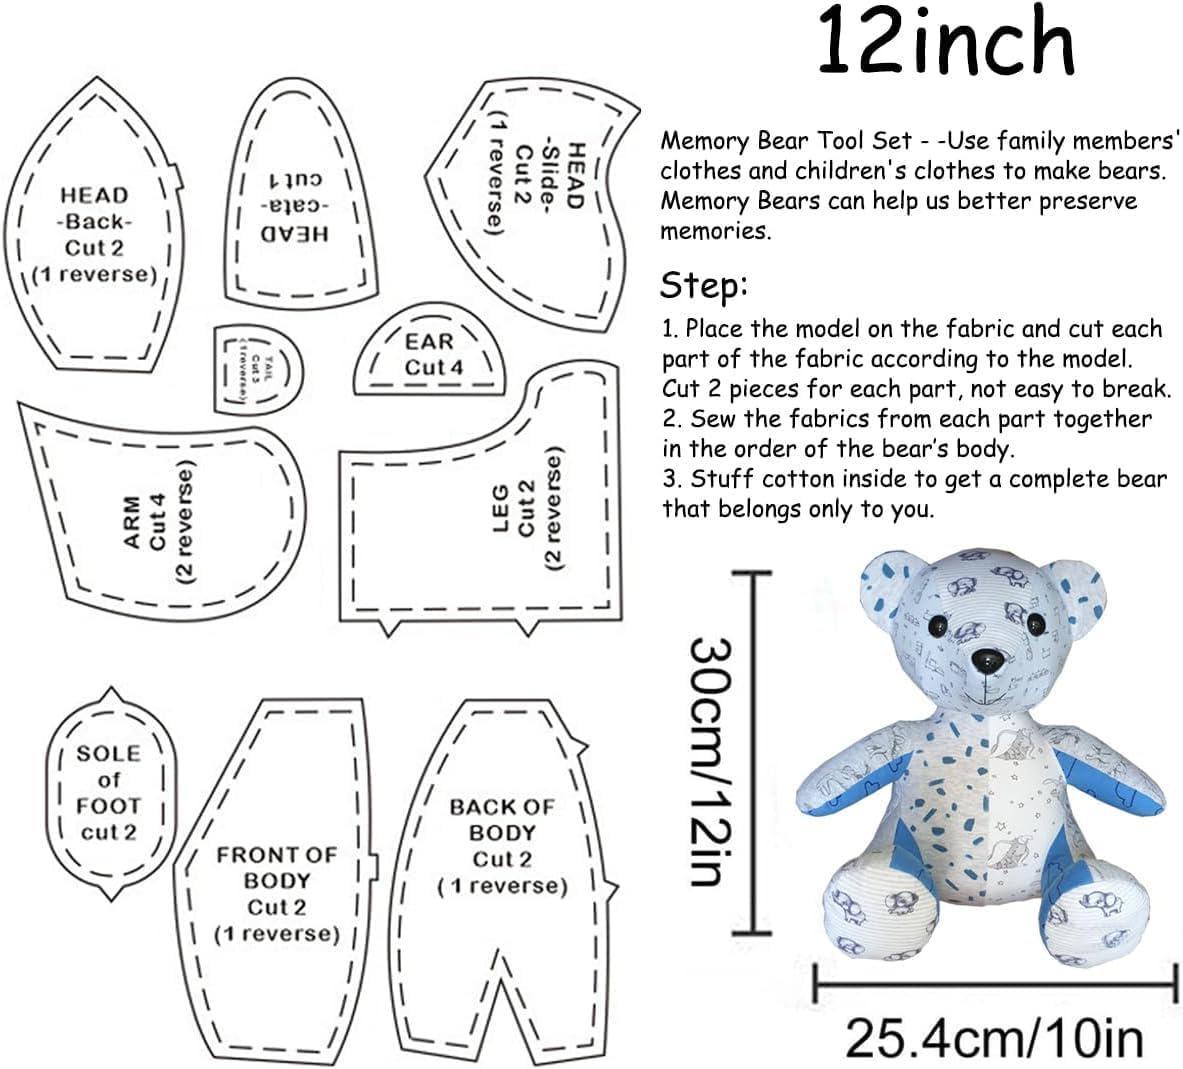  Memory Bear Template Ruler Set 10 PCS- with  Instructions,Acrylic Quilting Templates Cutting Set, Memory Bear Sewing  Patterns Template,Sewing Patterns for Beginners Home Sewing Art Craft  (10inch) : Arts, Crafts 